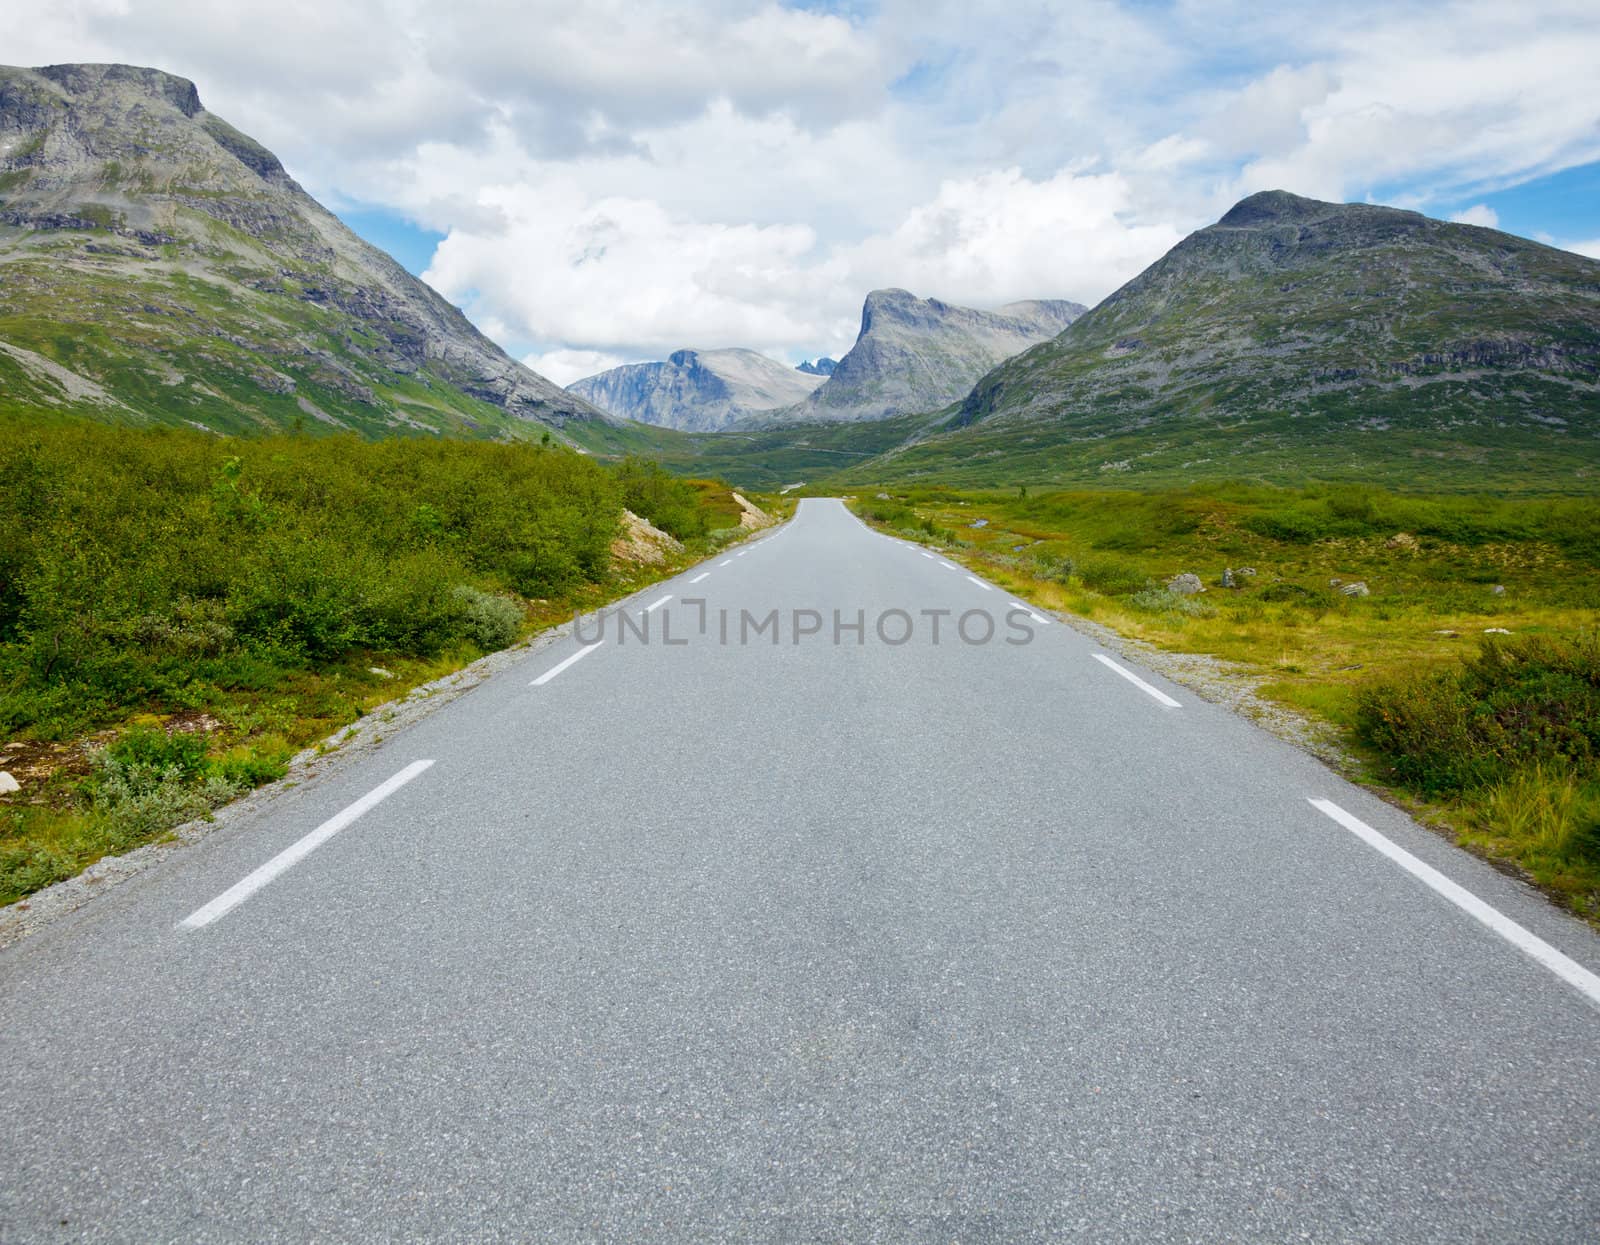 Straight and empty mountain road by naumoid